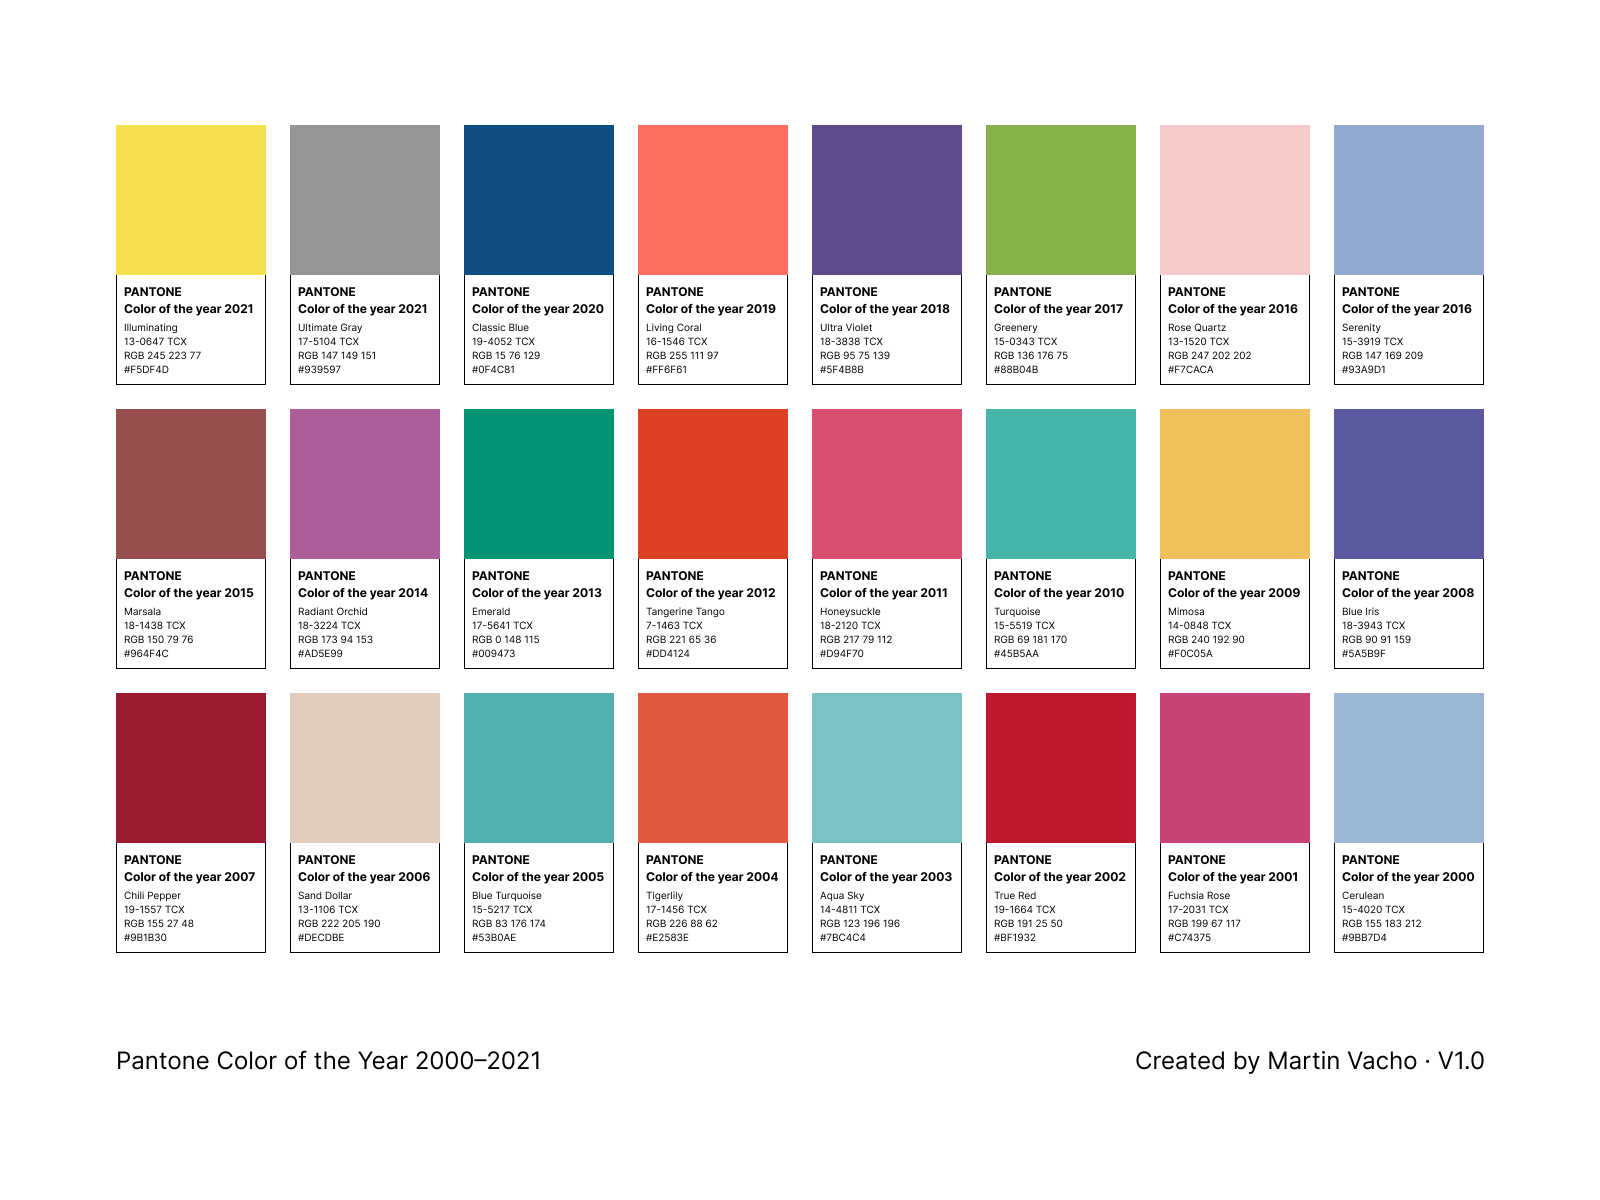 Most Popular Color(s) by the decade? r/generationology